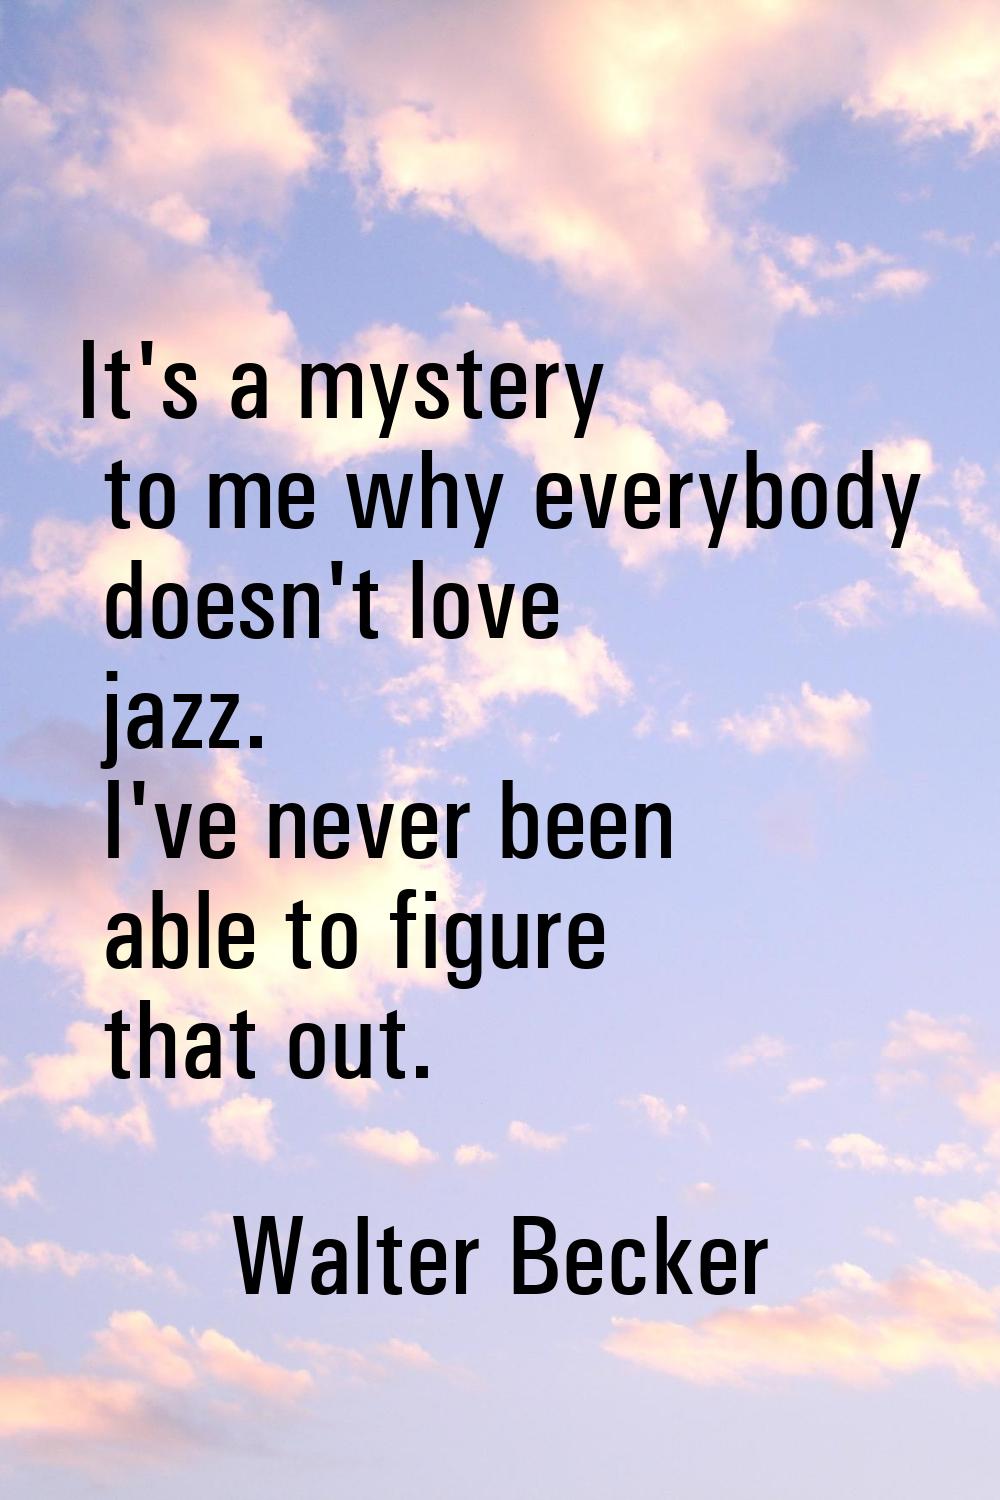 It's a mystery to me why everybody doesn't love jazz. I've never been able to figure that out.